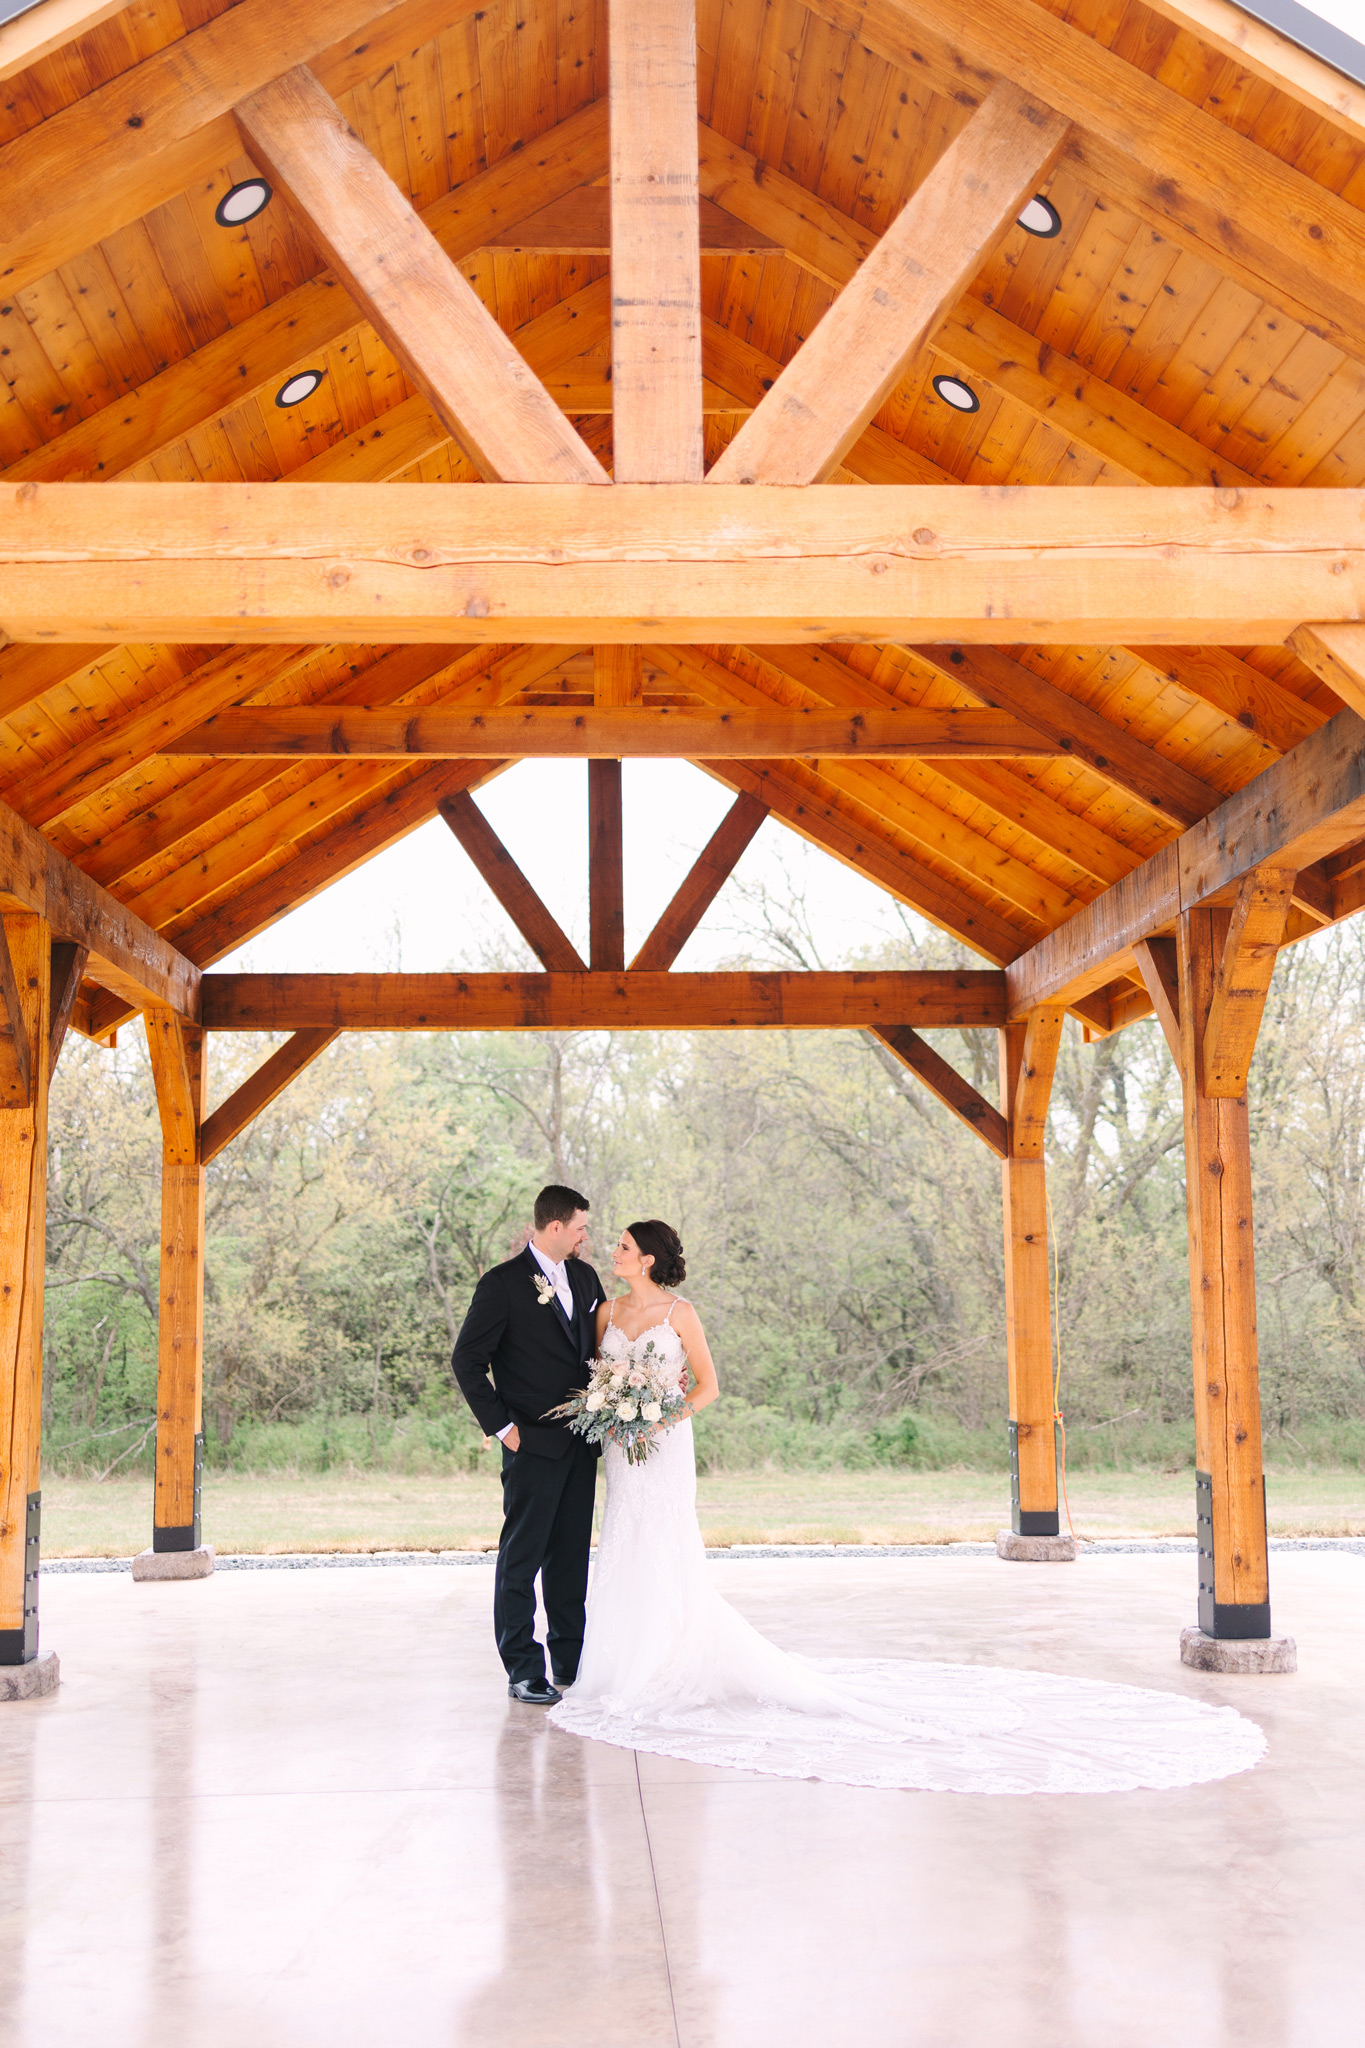 A bride and groom embrace and look at each other under the Pavilion in the Courtyard at The VeNue Event Space